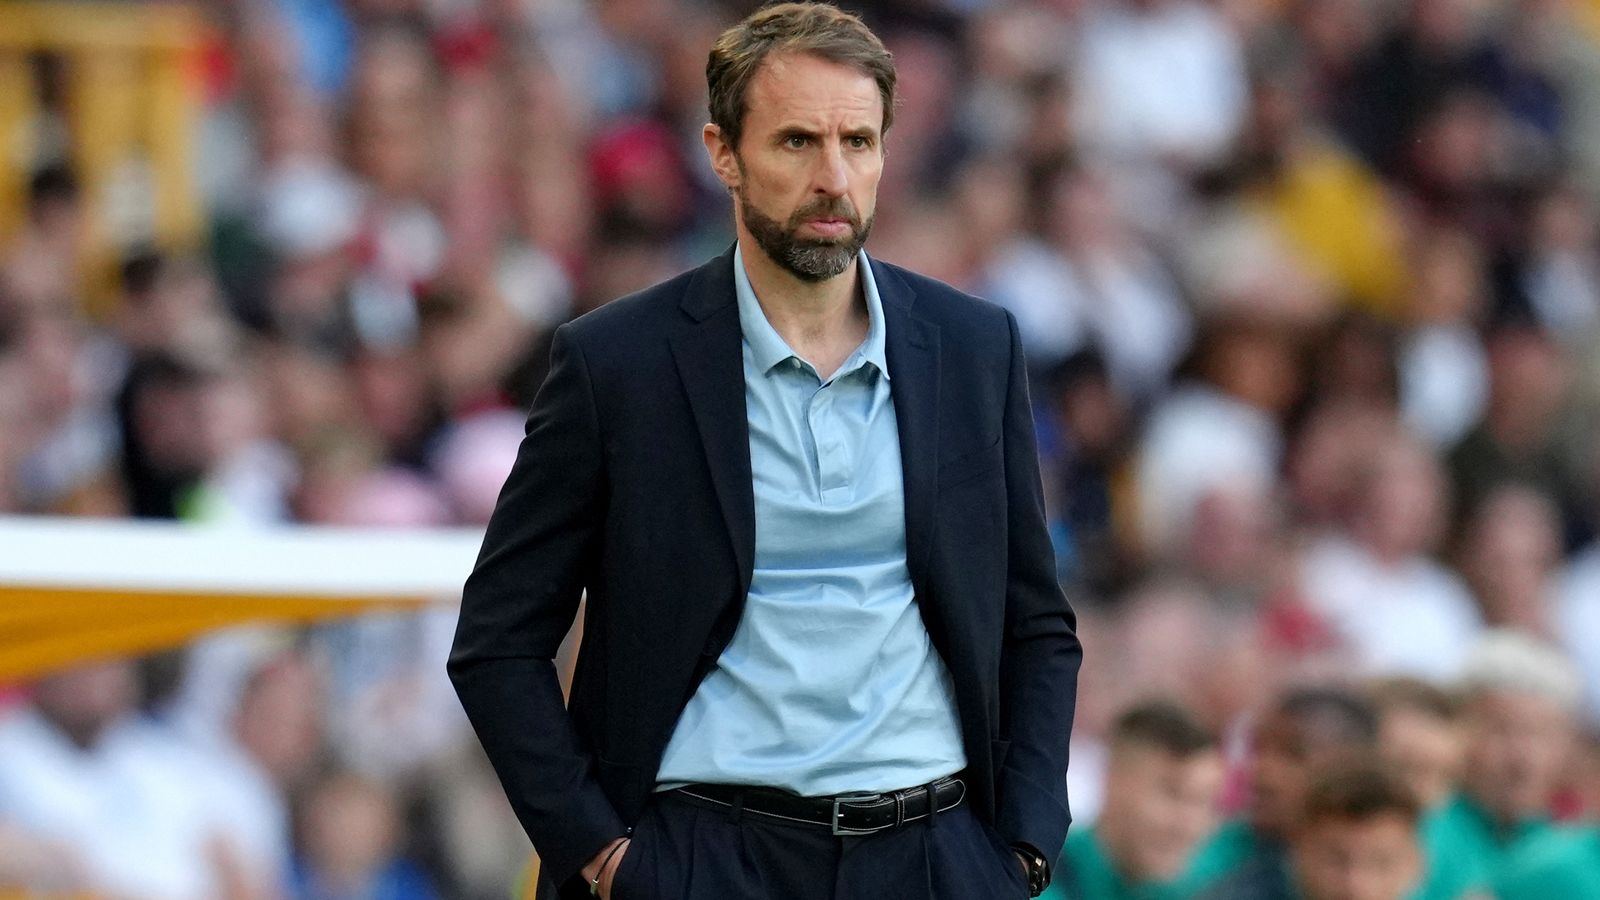 Gareth Southgate: FA tells England manager his job is safe despite Nations League results